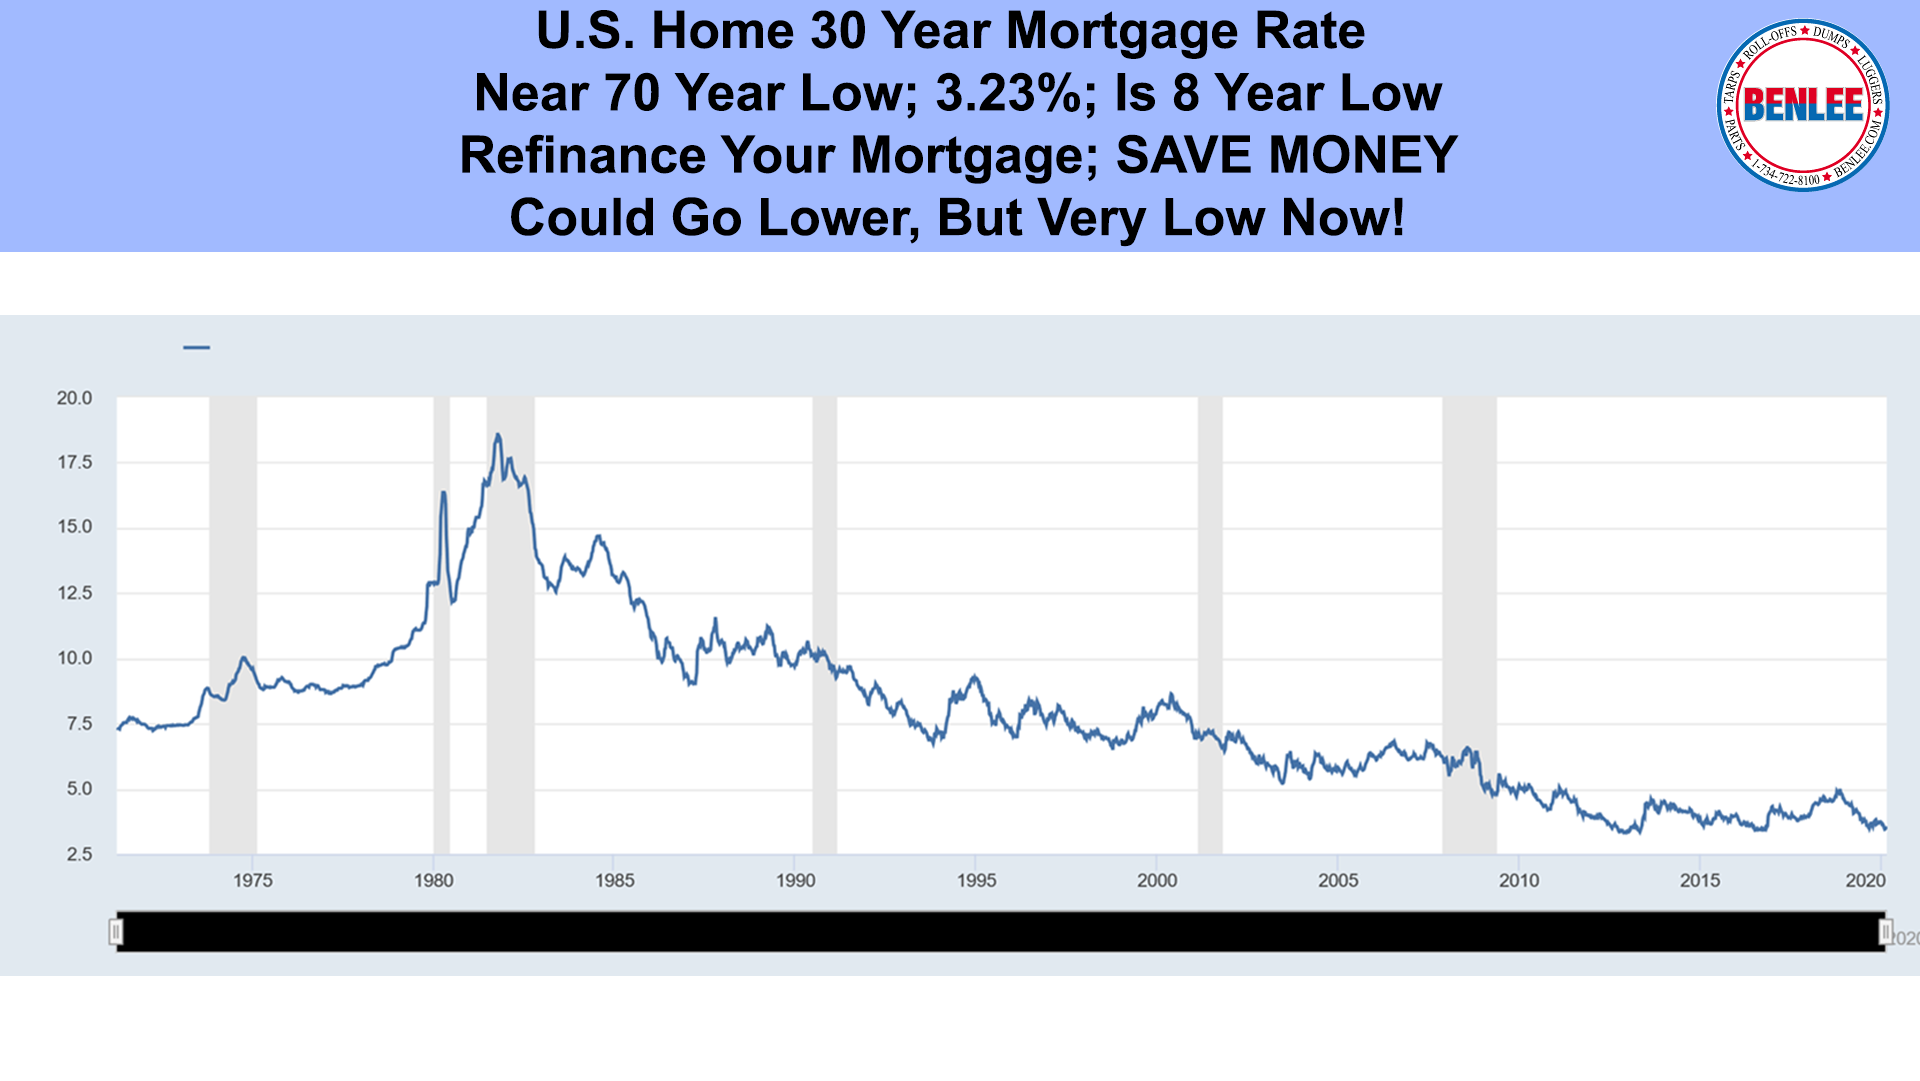 U.S. Home 30 Year Mortgage Rate